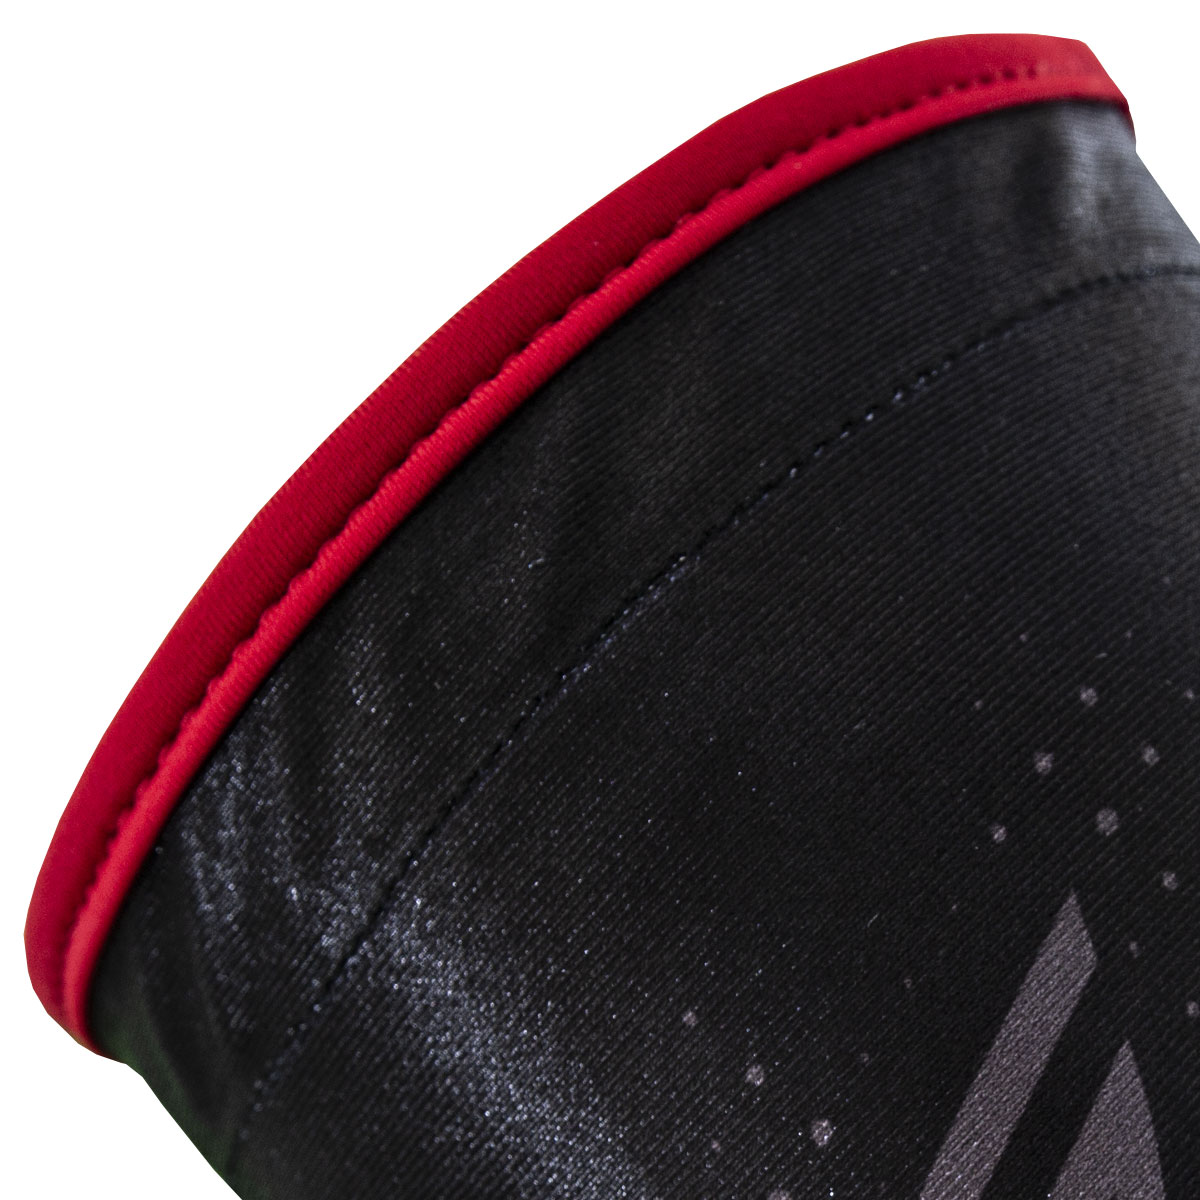 SMPL Paintball Elbow/Arm Pads, Black Red - Social Paintball